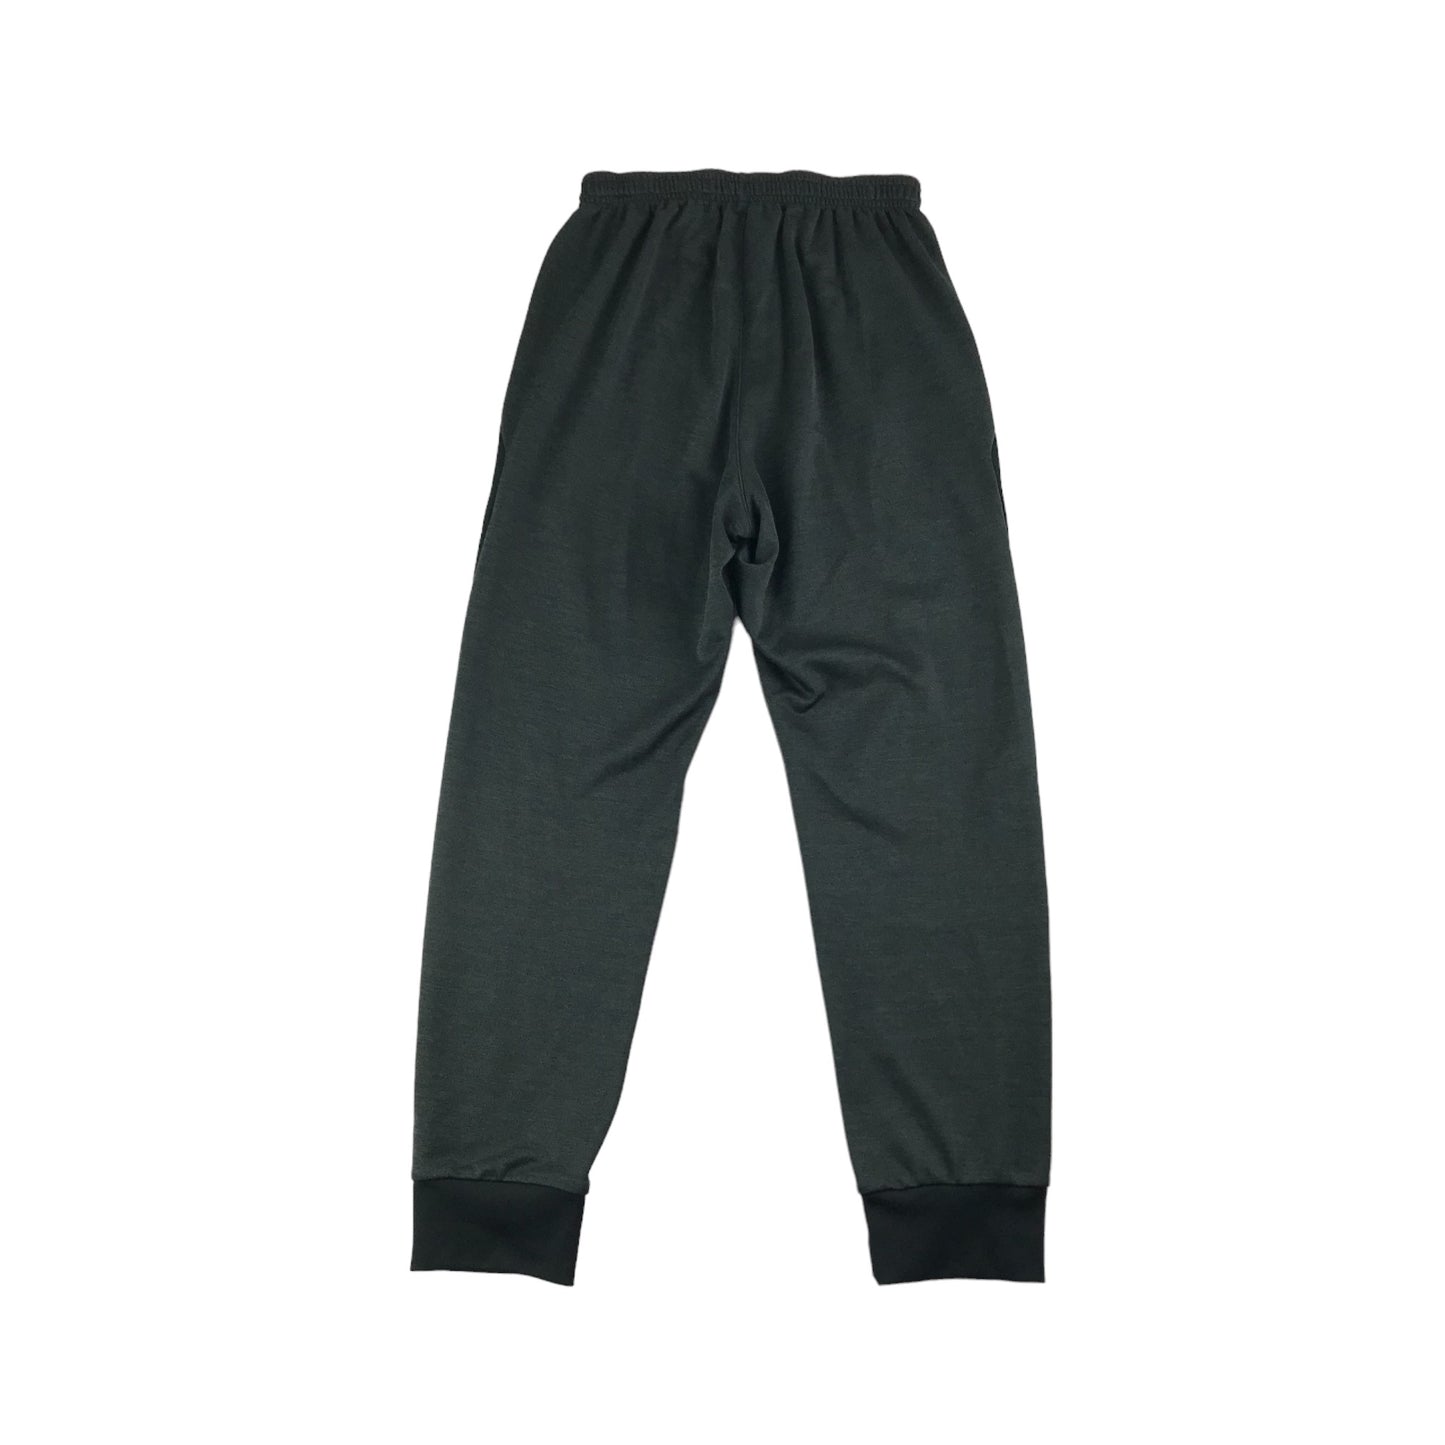 Nike Joggers Age  13-14 Grey Black Pink Panelled